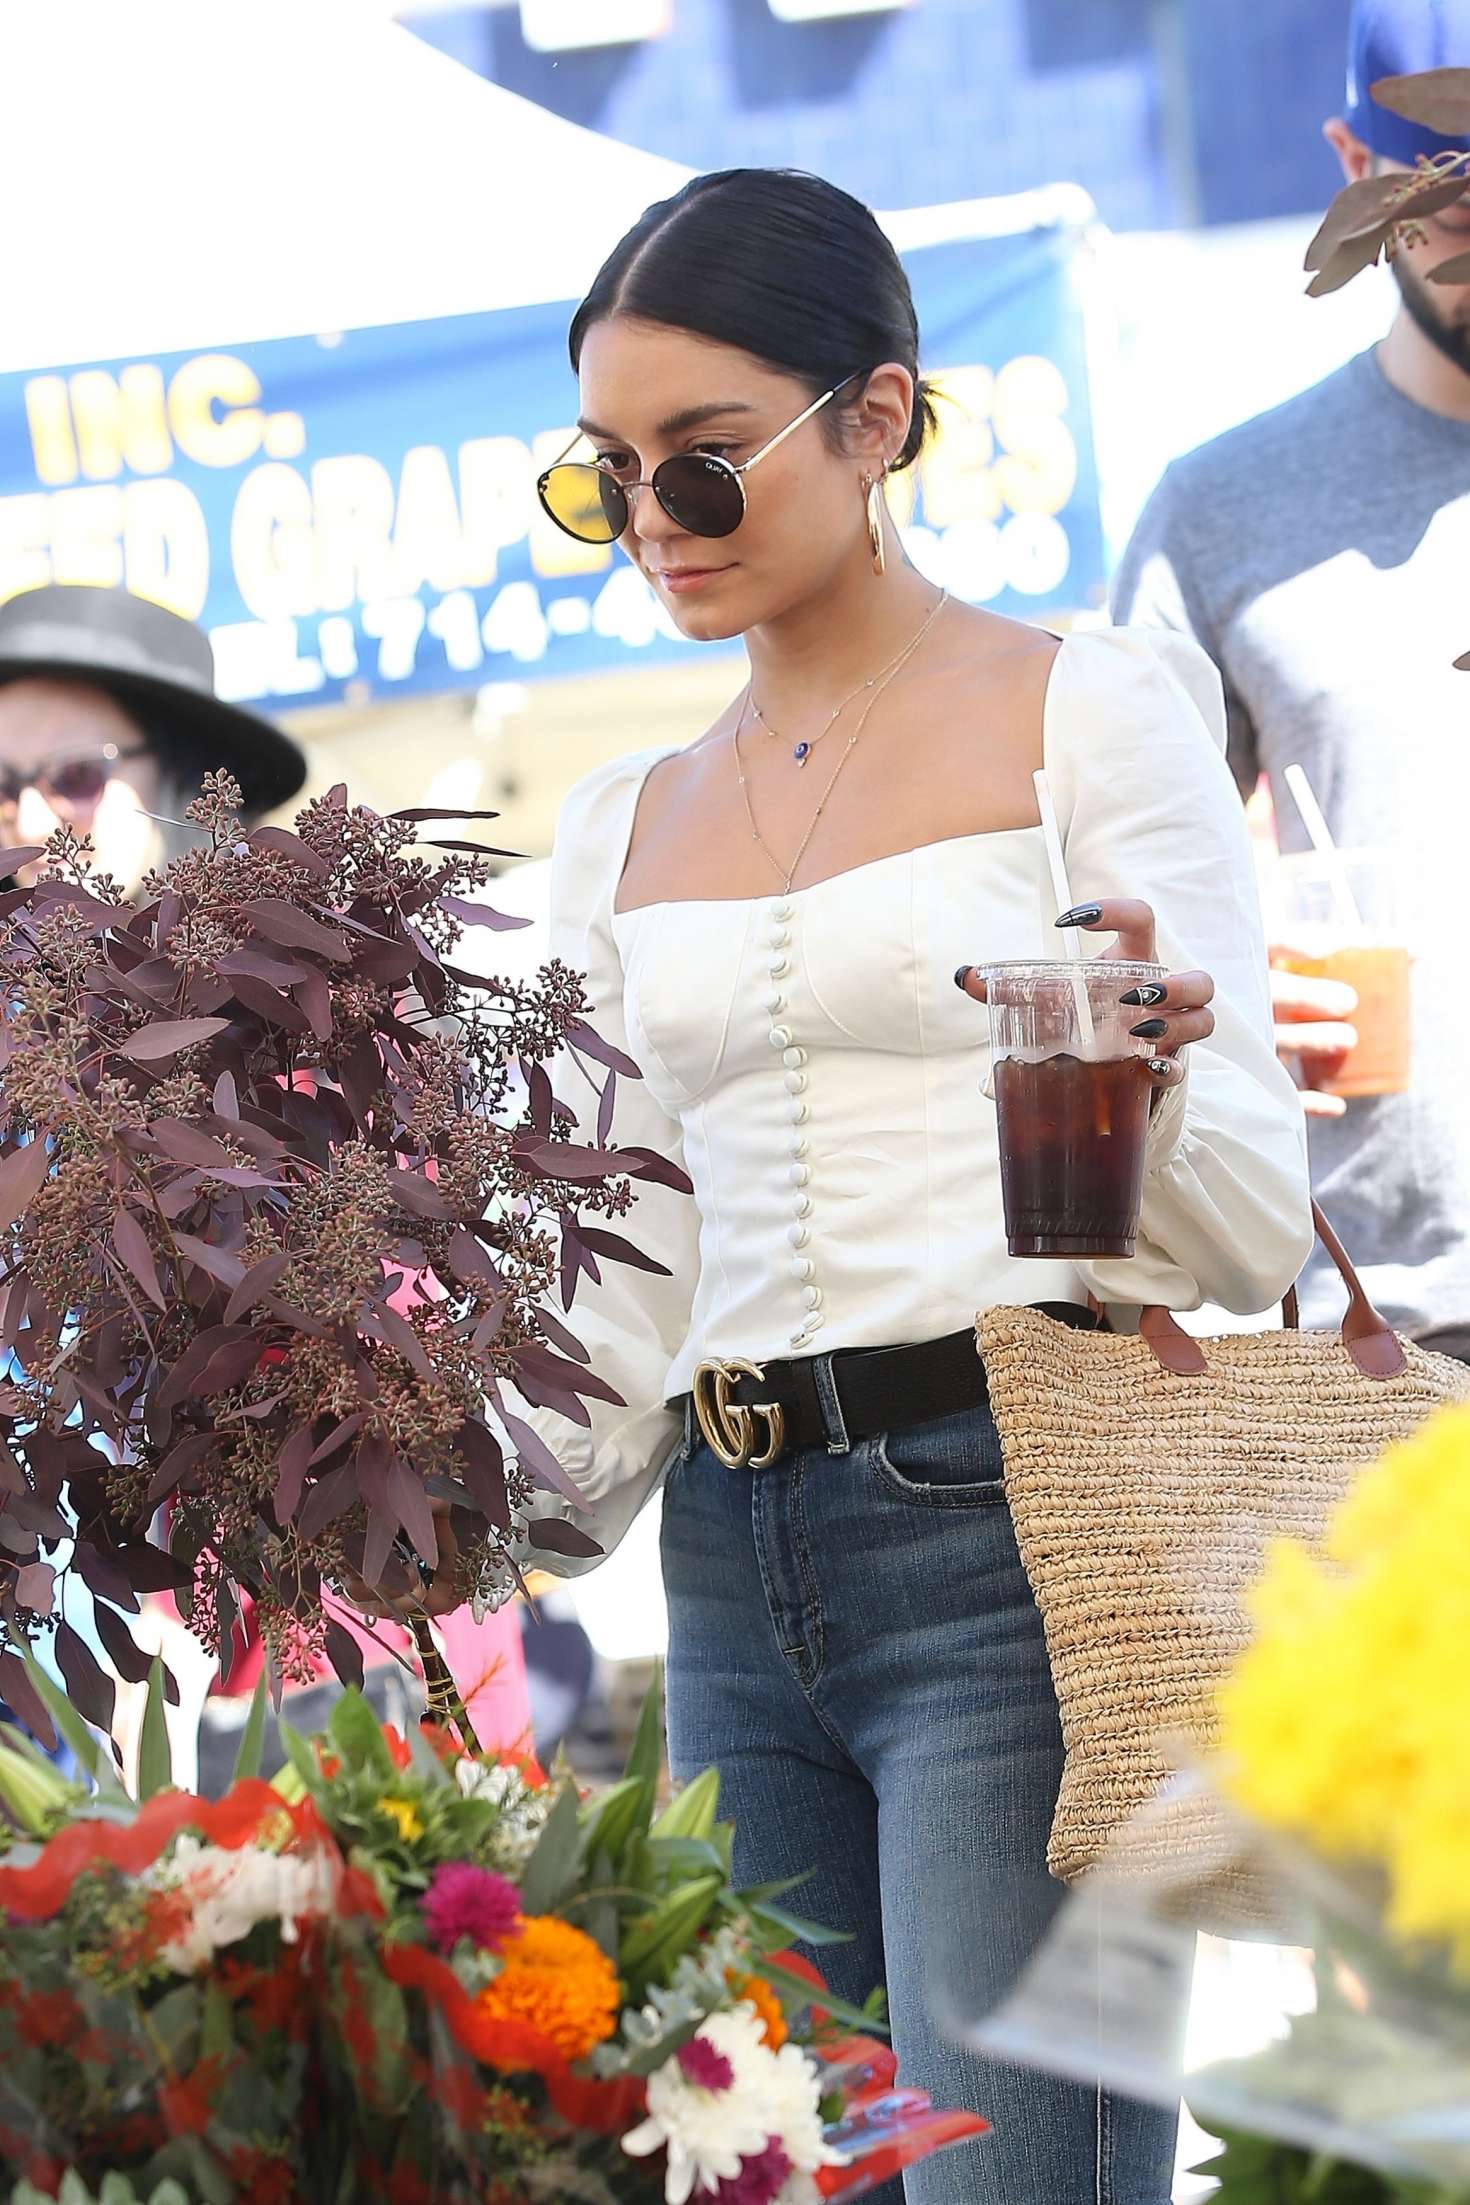 Vanessa Hudgens â€“ Shopping for flowers at the Farmers Market in Studio City